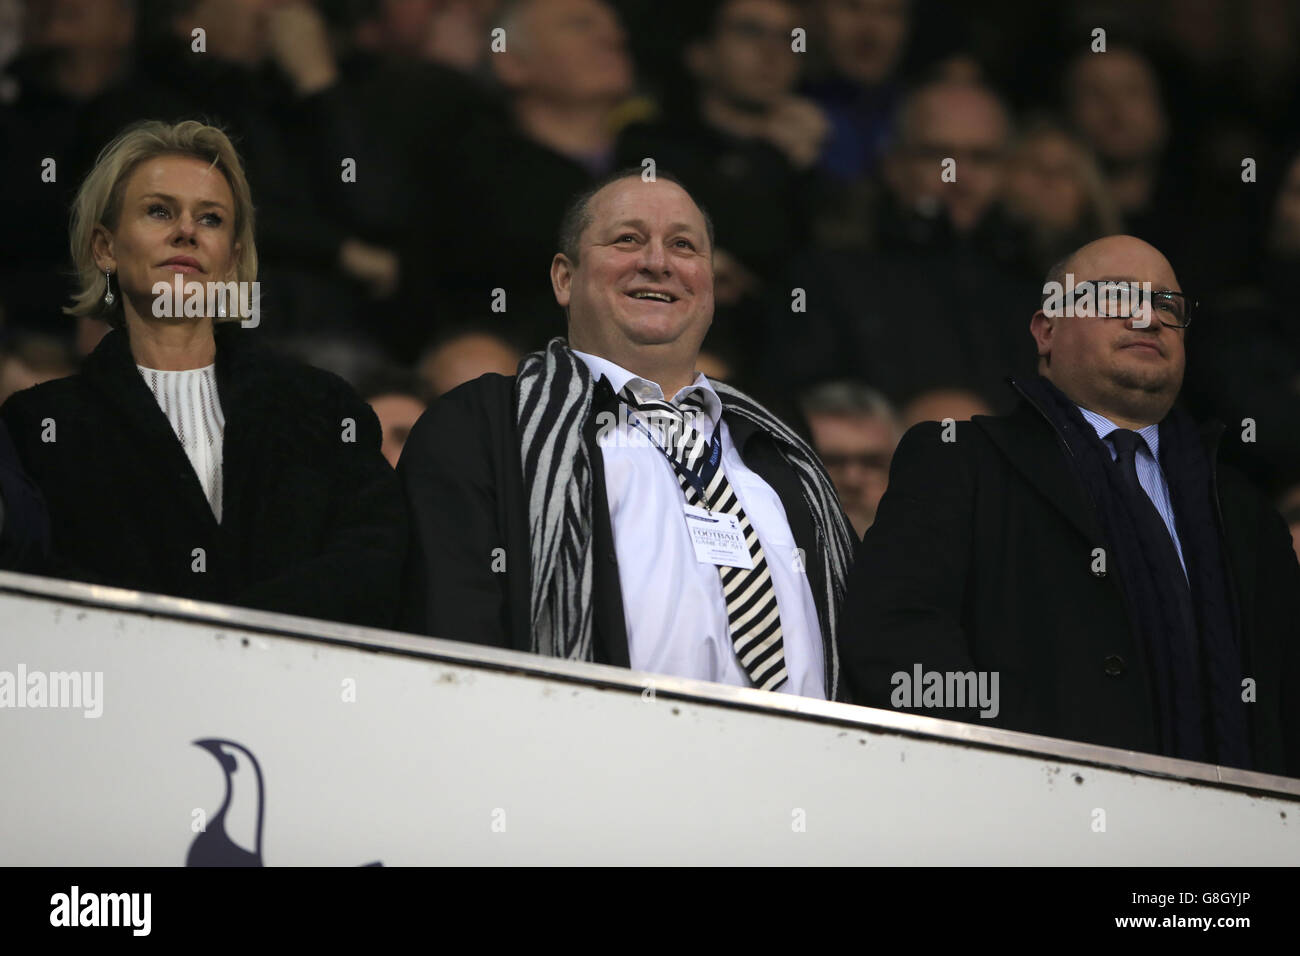 Newcastle United owner Mike Ashley (centre) and wife Linda Ashley (left) watch from the stands alongside Newcastle United chief executive Lee Charnley (right) during the Barclays Premier League match at White Hart Lane, London. Stock Photo